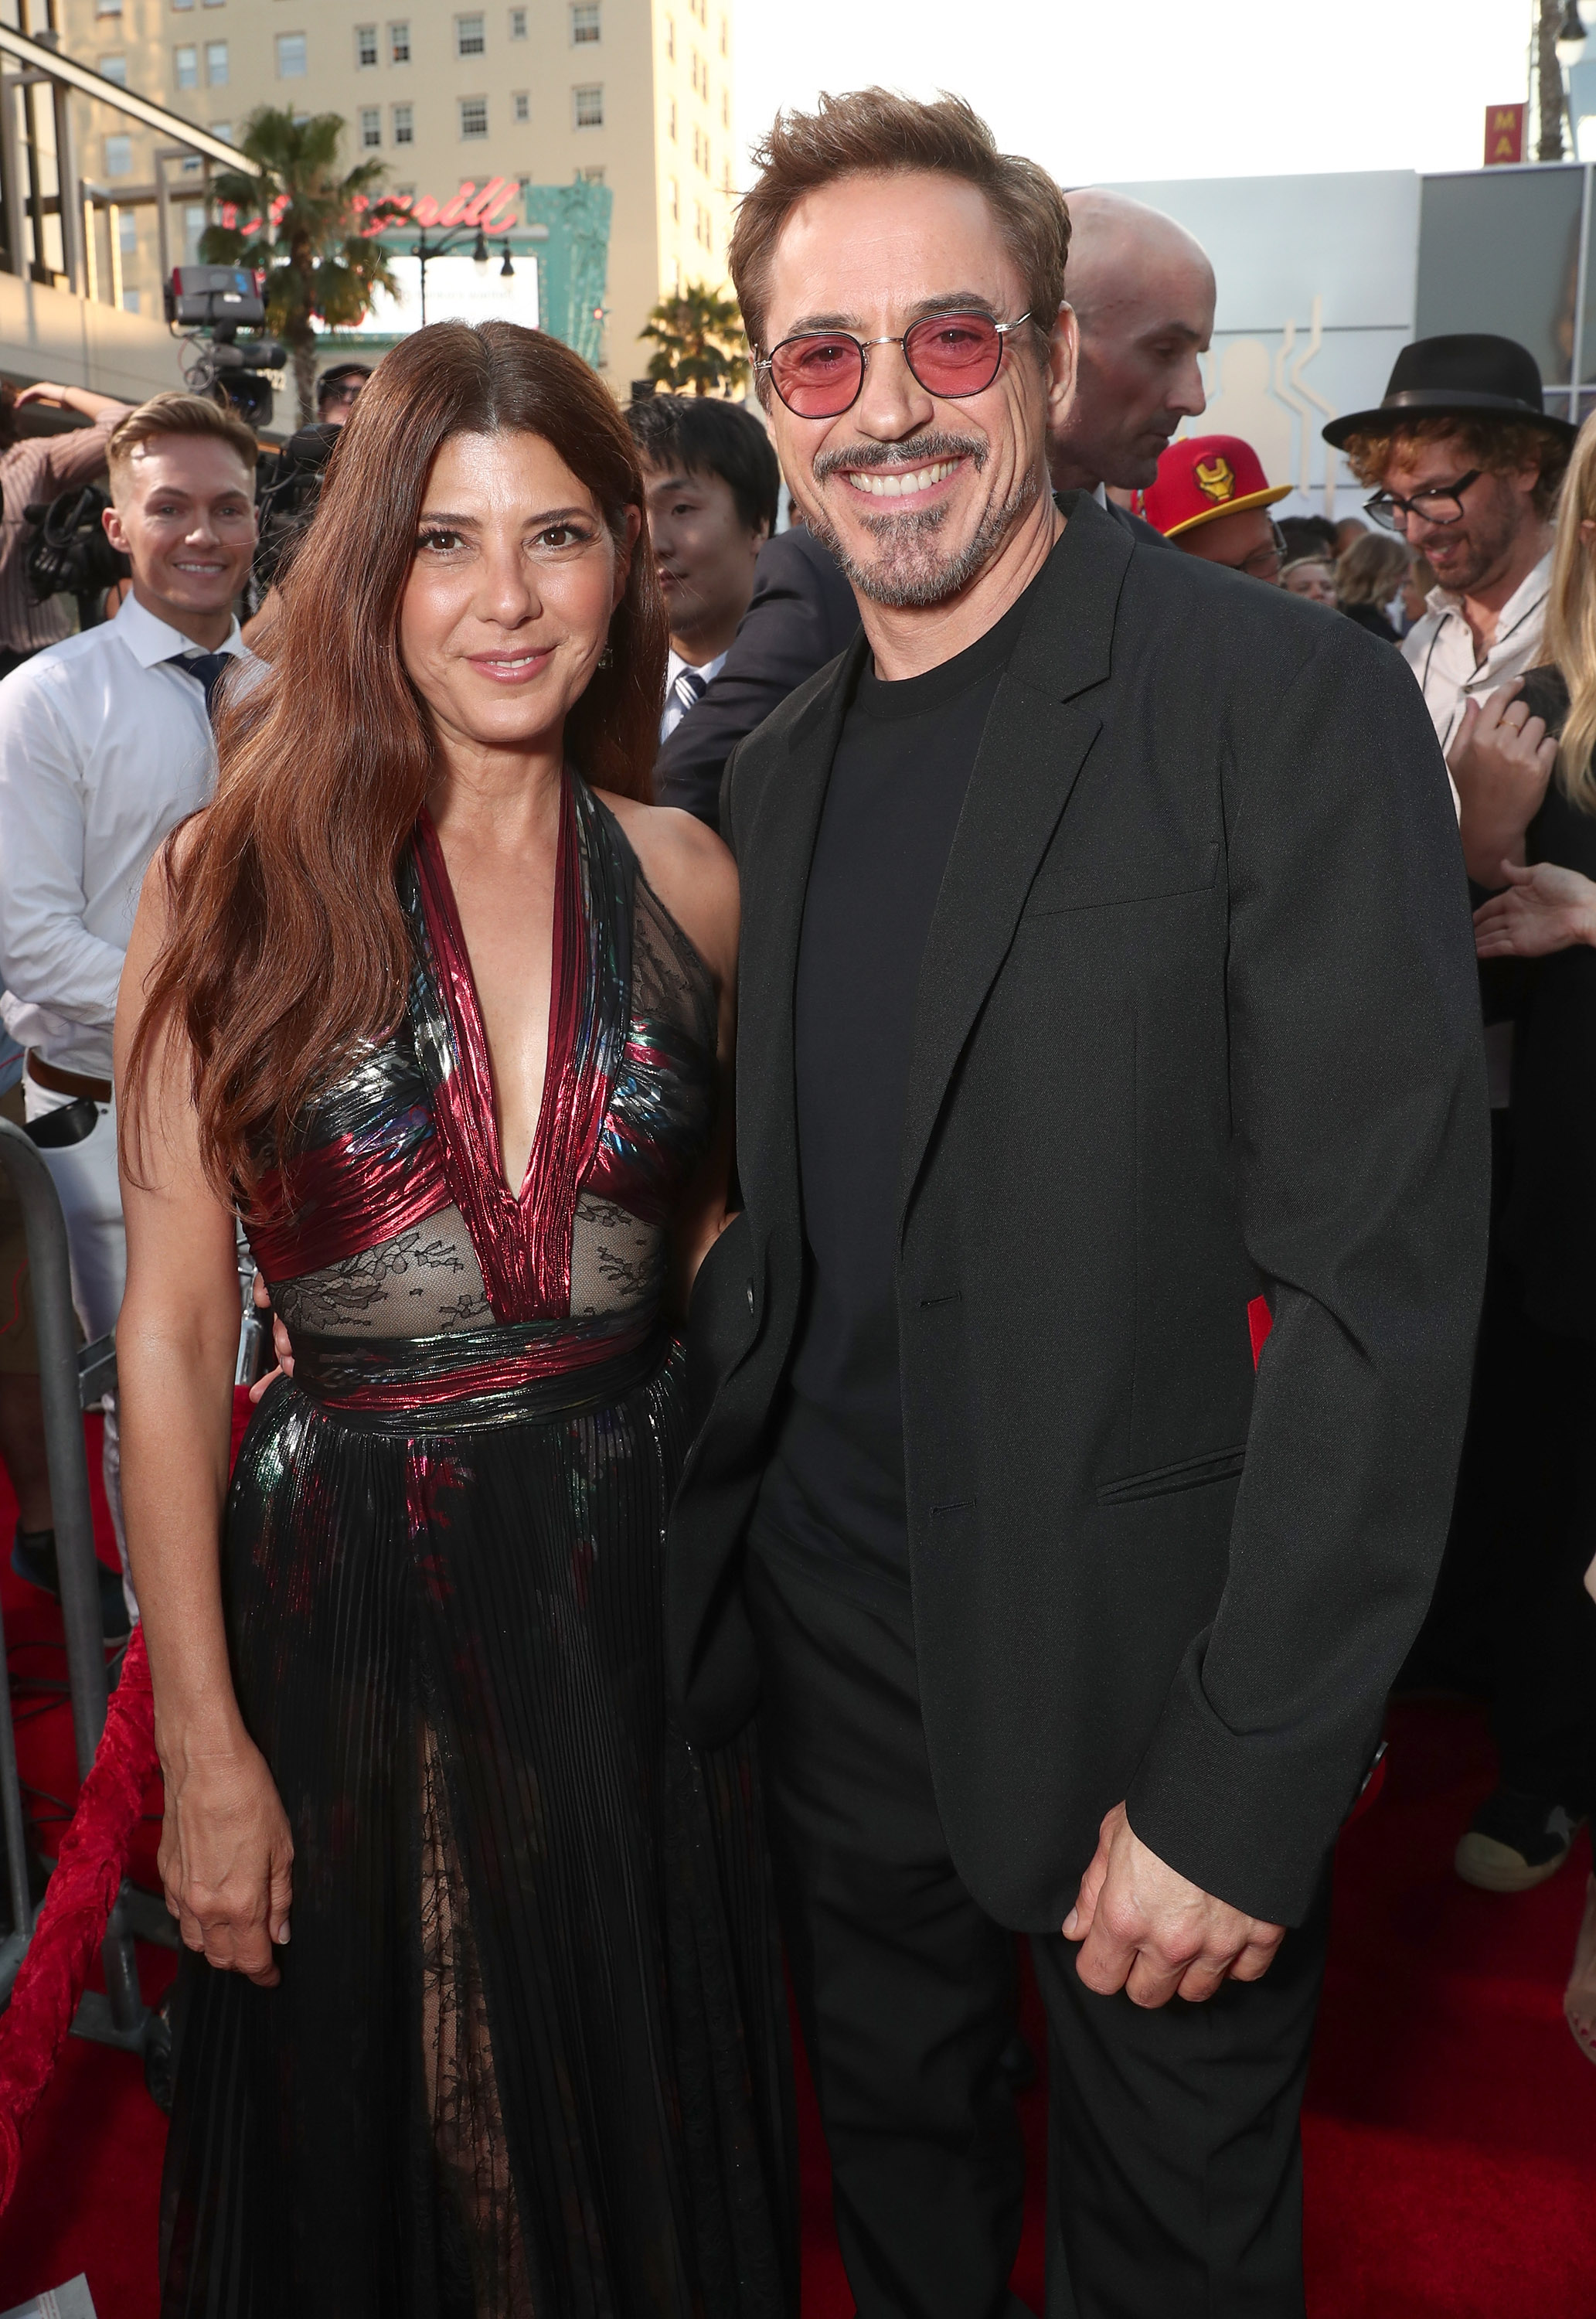 Marisa Tomei and Robert Downey Jr. at the premiere of "Spider-Man: Homecoming" at TCL Chinese Theatre on June 28, 2017 in Hollywood, California. | Source: Getty Images